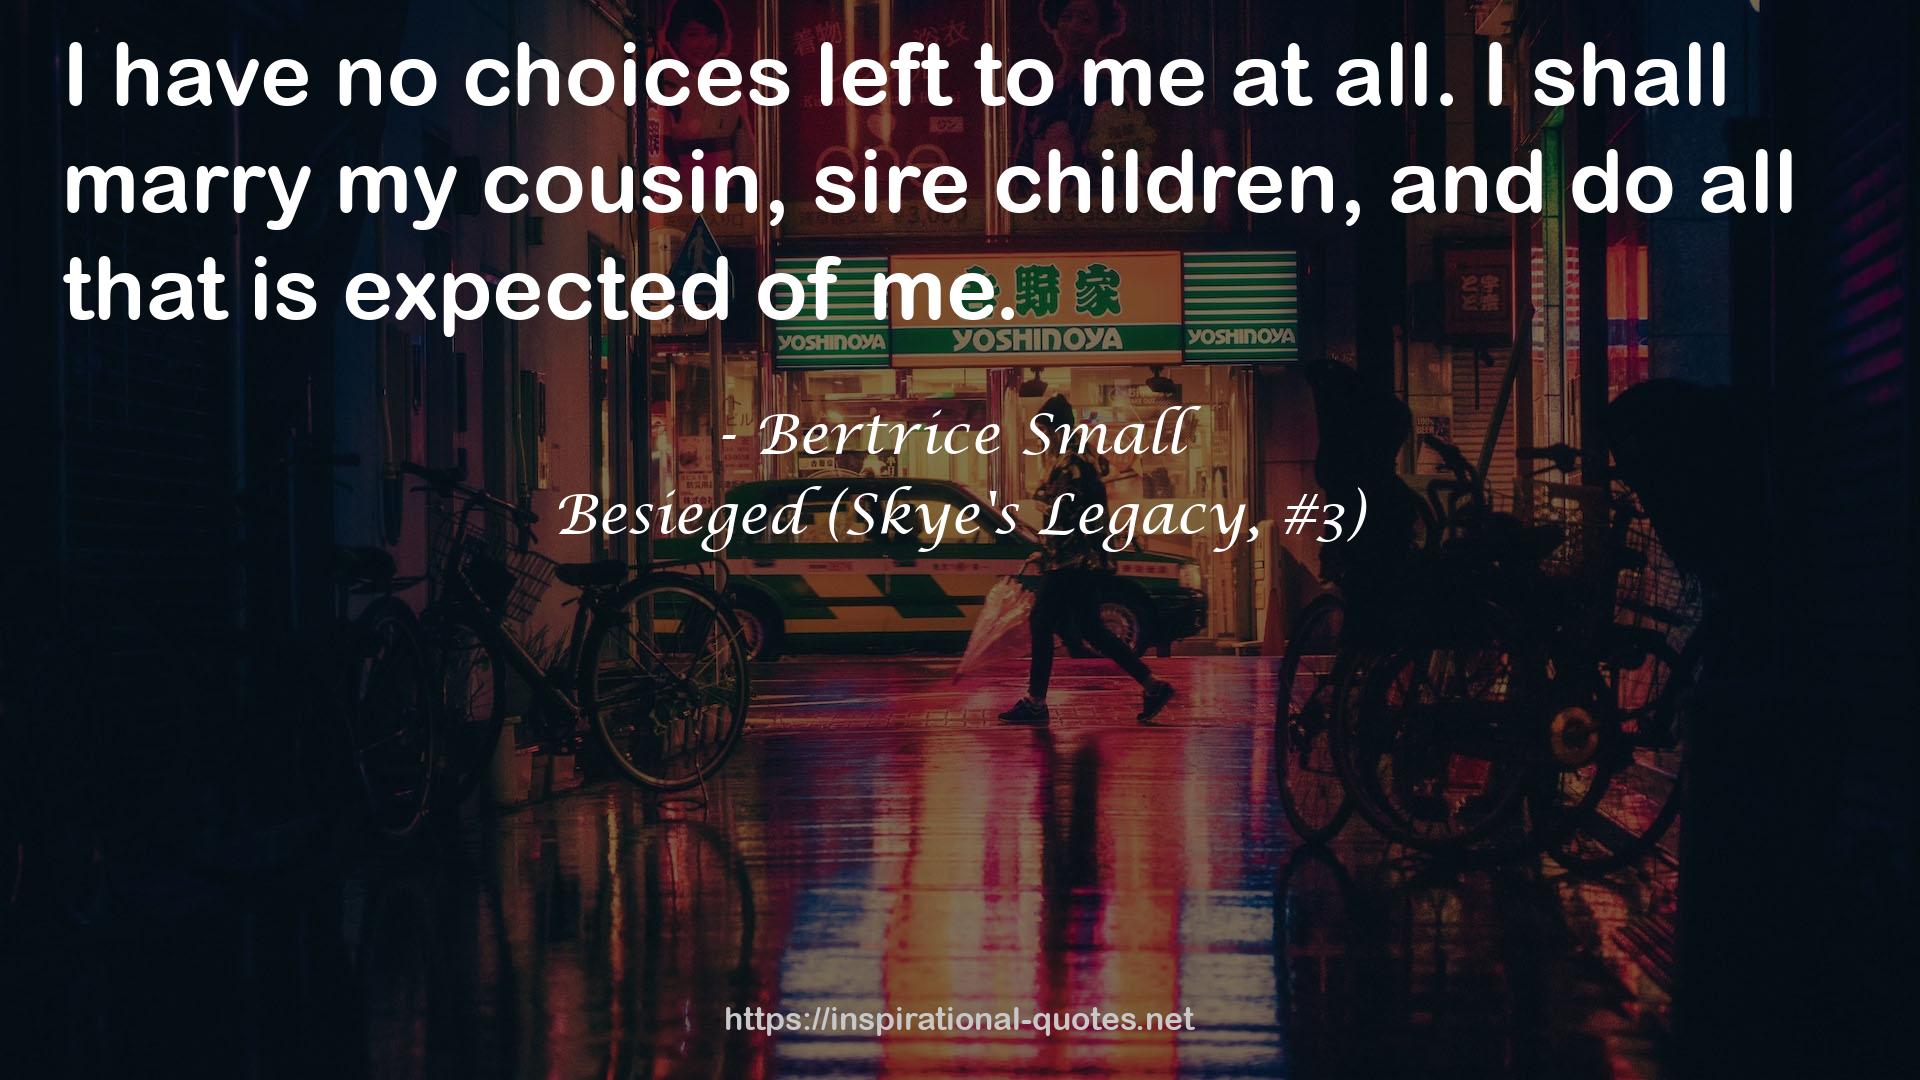 Besieged (Skye's Legacy, #3) QUOTES